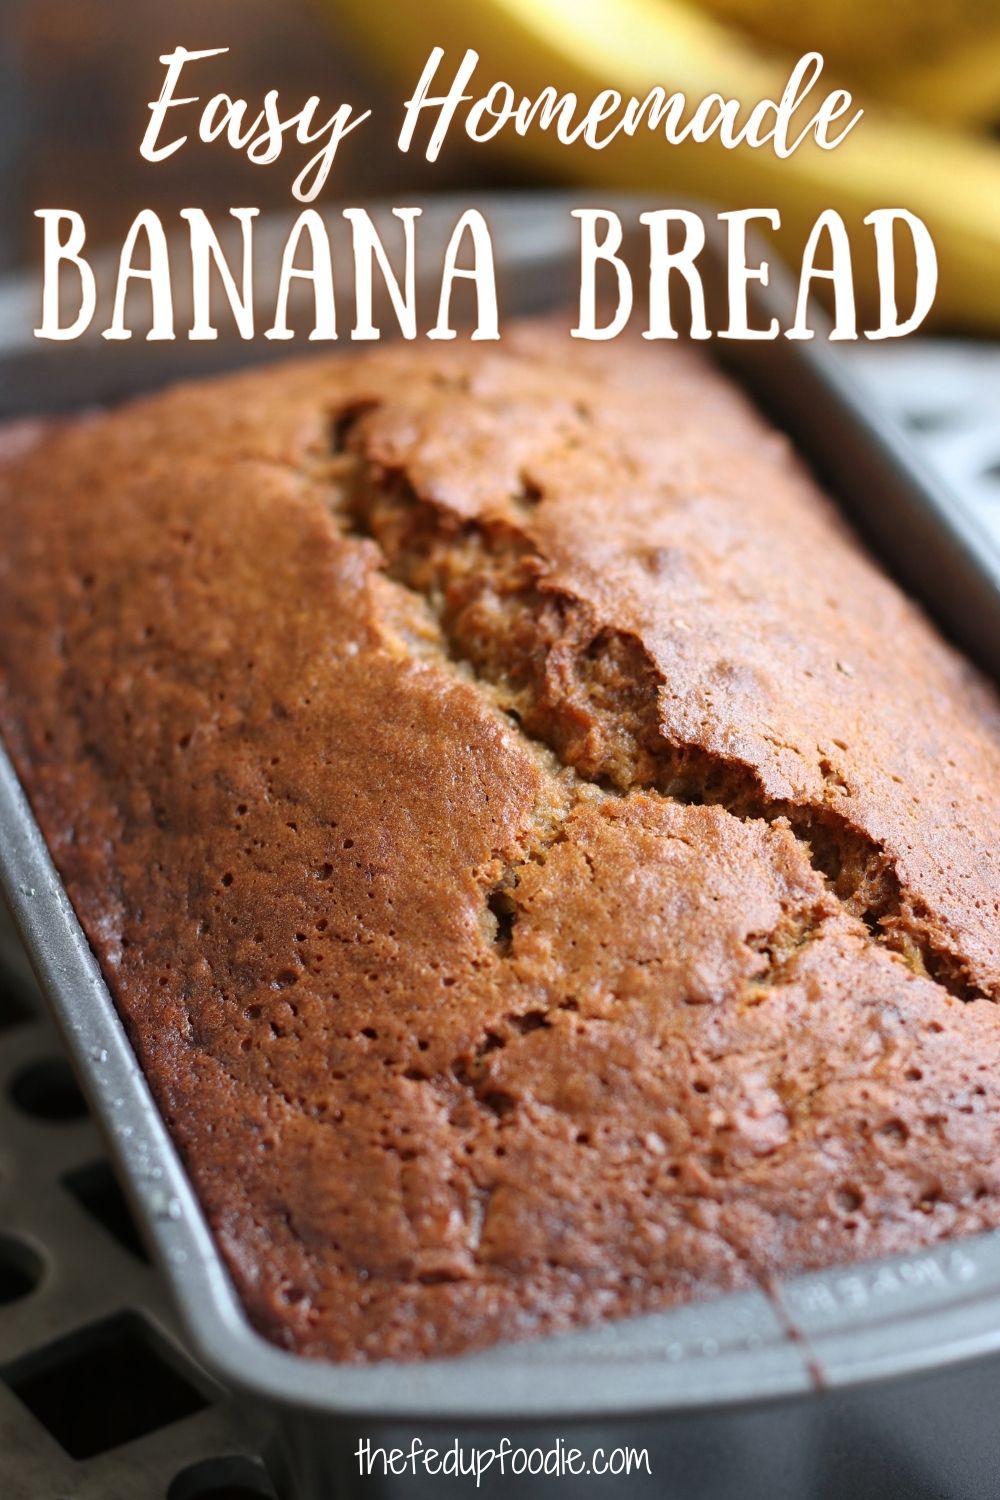 Simple ingredients and easy steps makes this the best Banana Bread recipe. Moist, flavorful and always the perfect solution to having too many overripe bananas. Keep a loaf or two in the freezer to enjoy at a later date.
#EasyHomemadeBananaBread #BananaBreadRecipe #BananaBread #SimpleBananaBread #EasyMoistBananaBread 